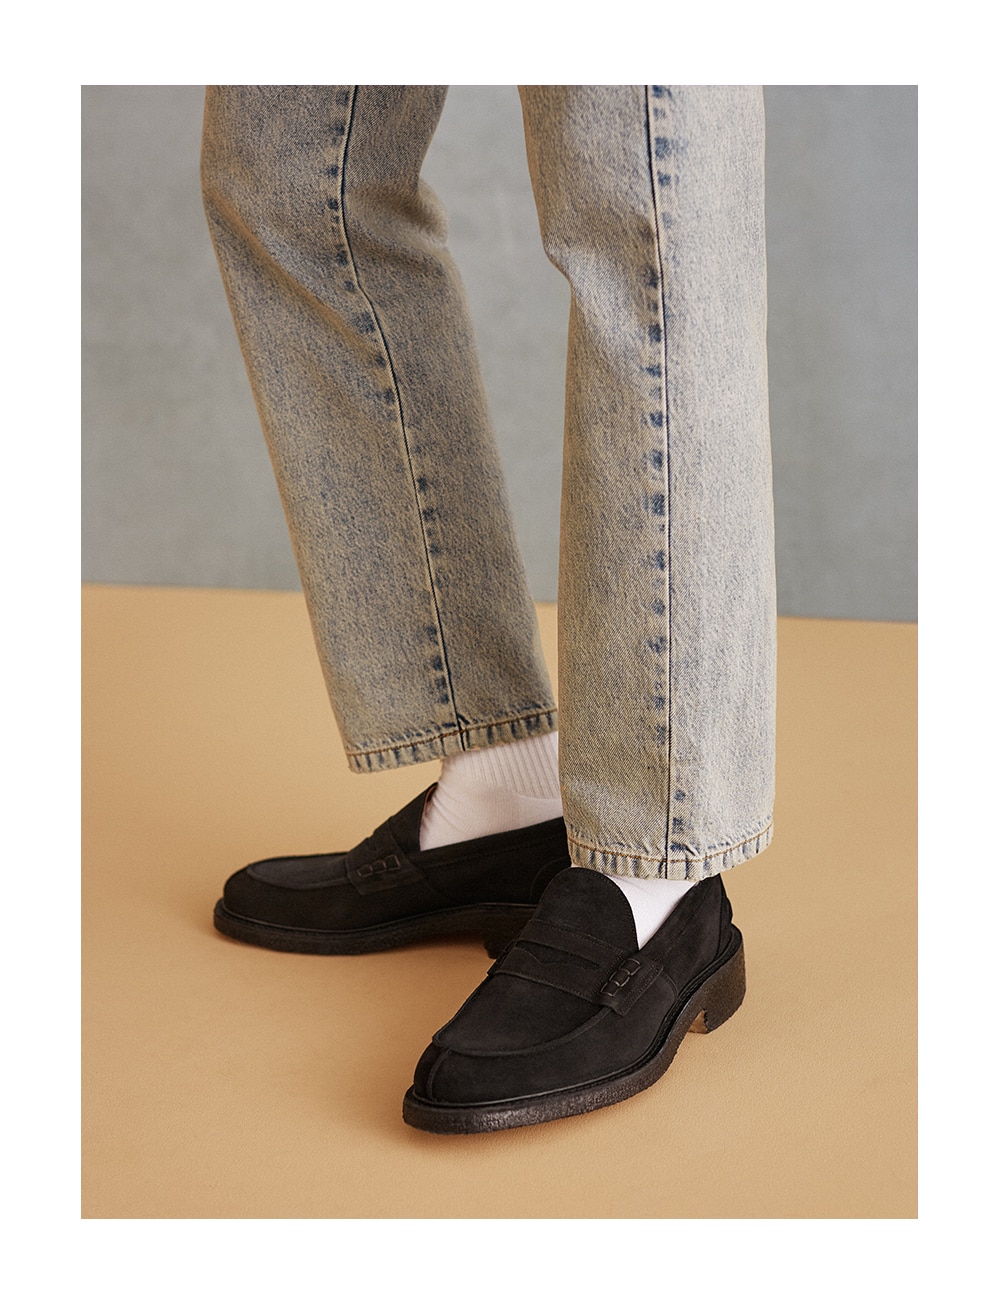 Dress Code: The Men's Guide To Wearing Loafers | The Journal | MR PORTER